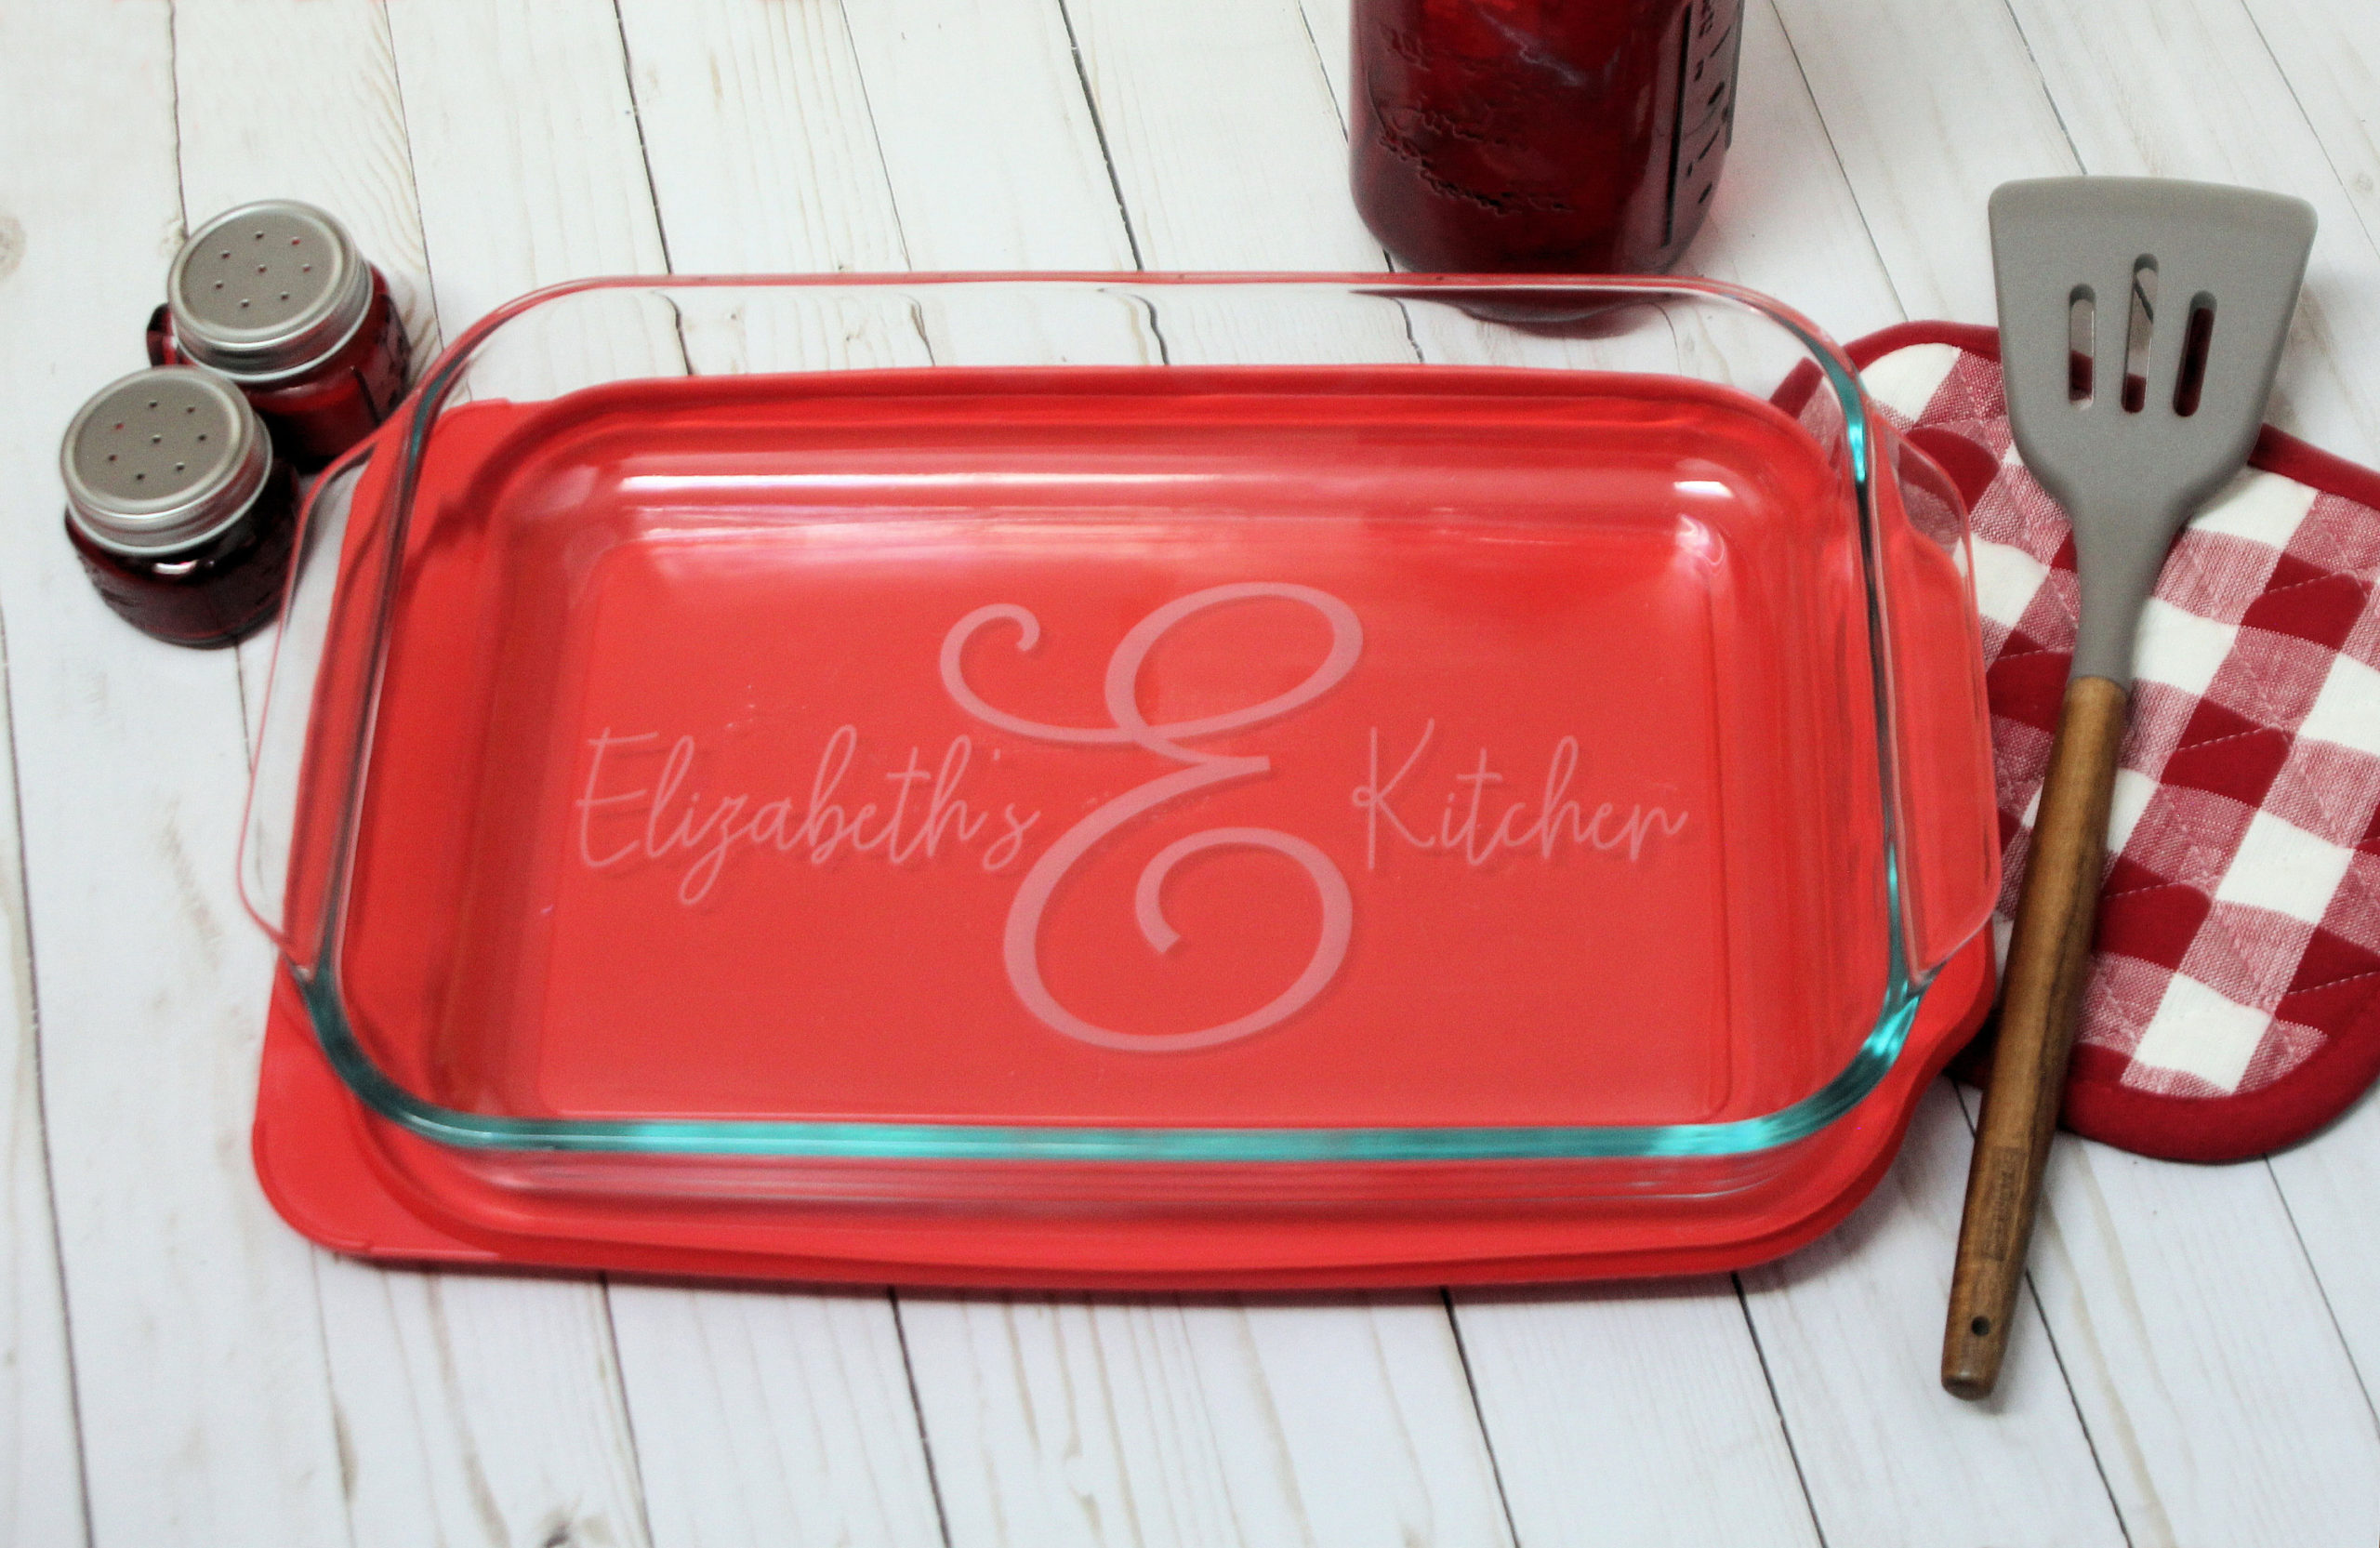 Pyrex Casserole Dish - Recipe for a Happy Marriage (PERSONALIZED) – Spotted  Moon